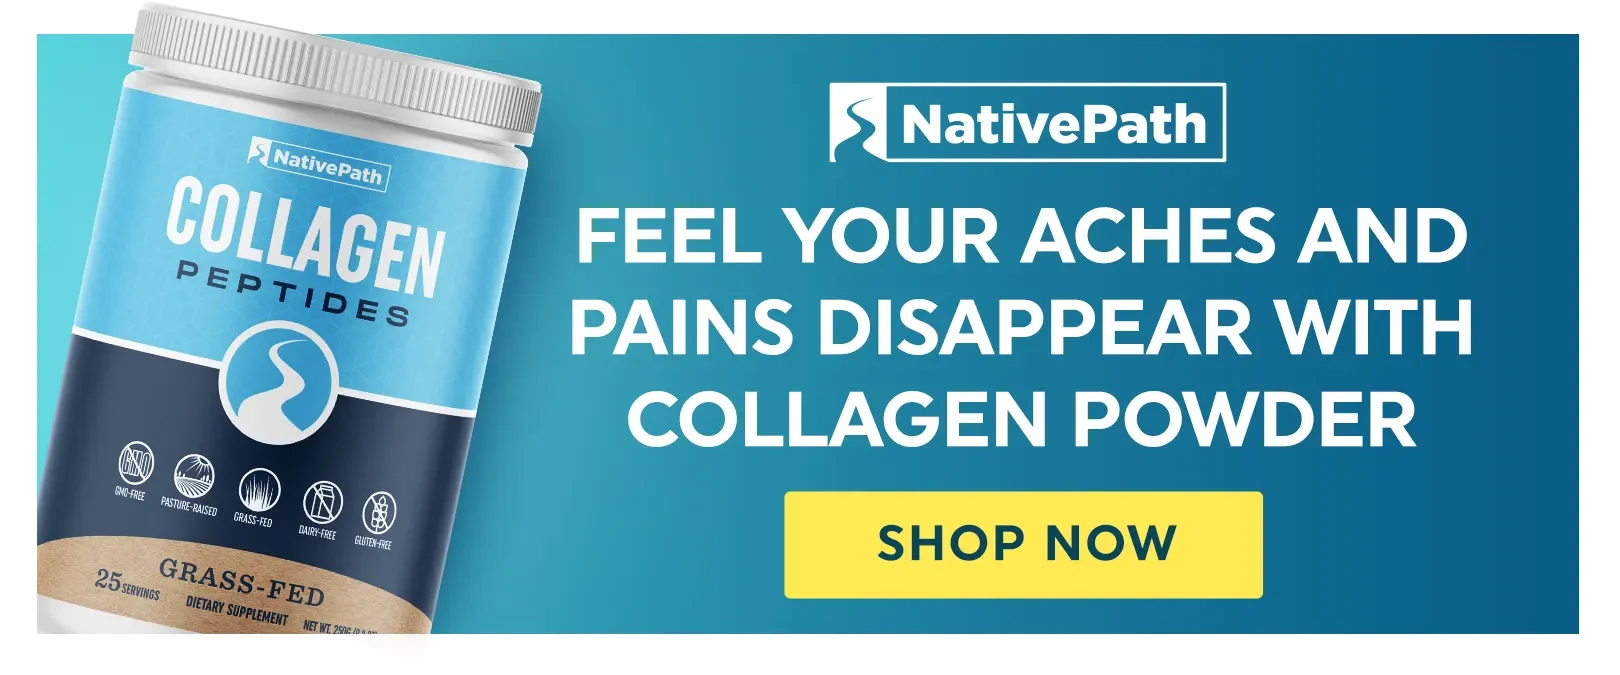 NativePath Collagen Powder to Reduce Aches and Pains